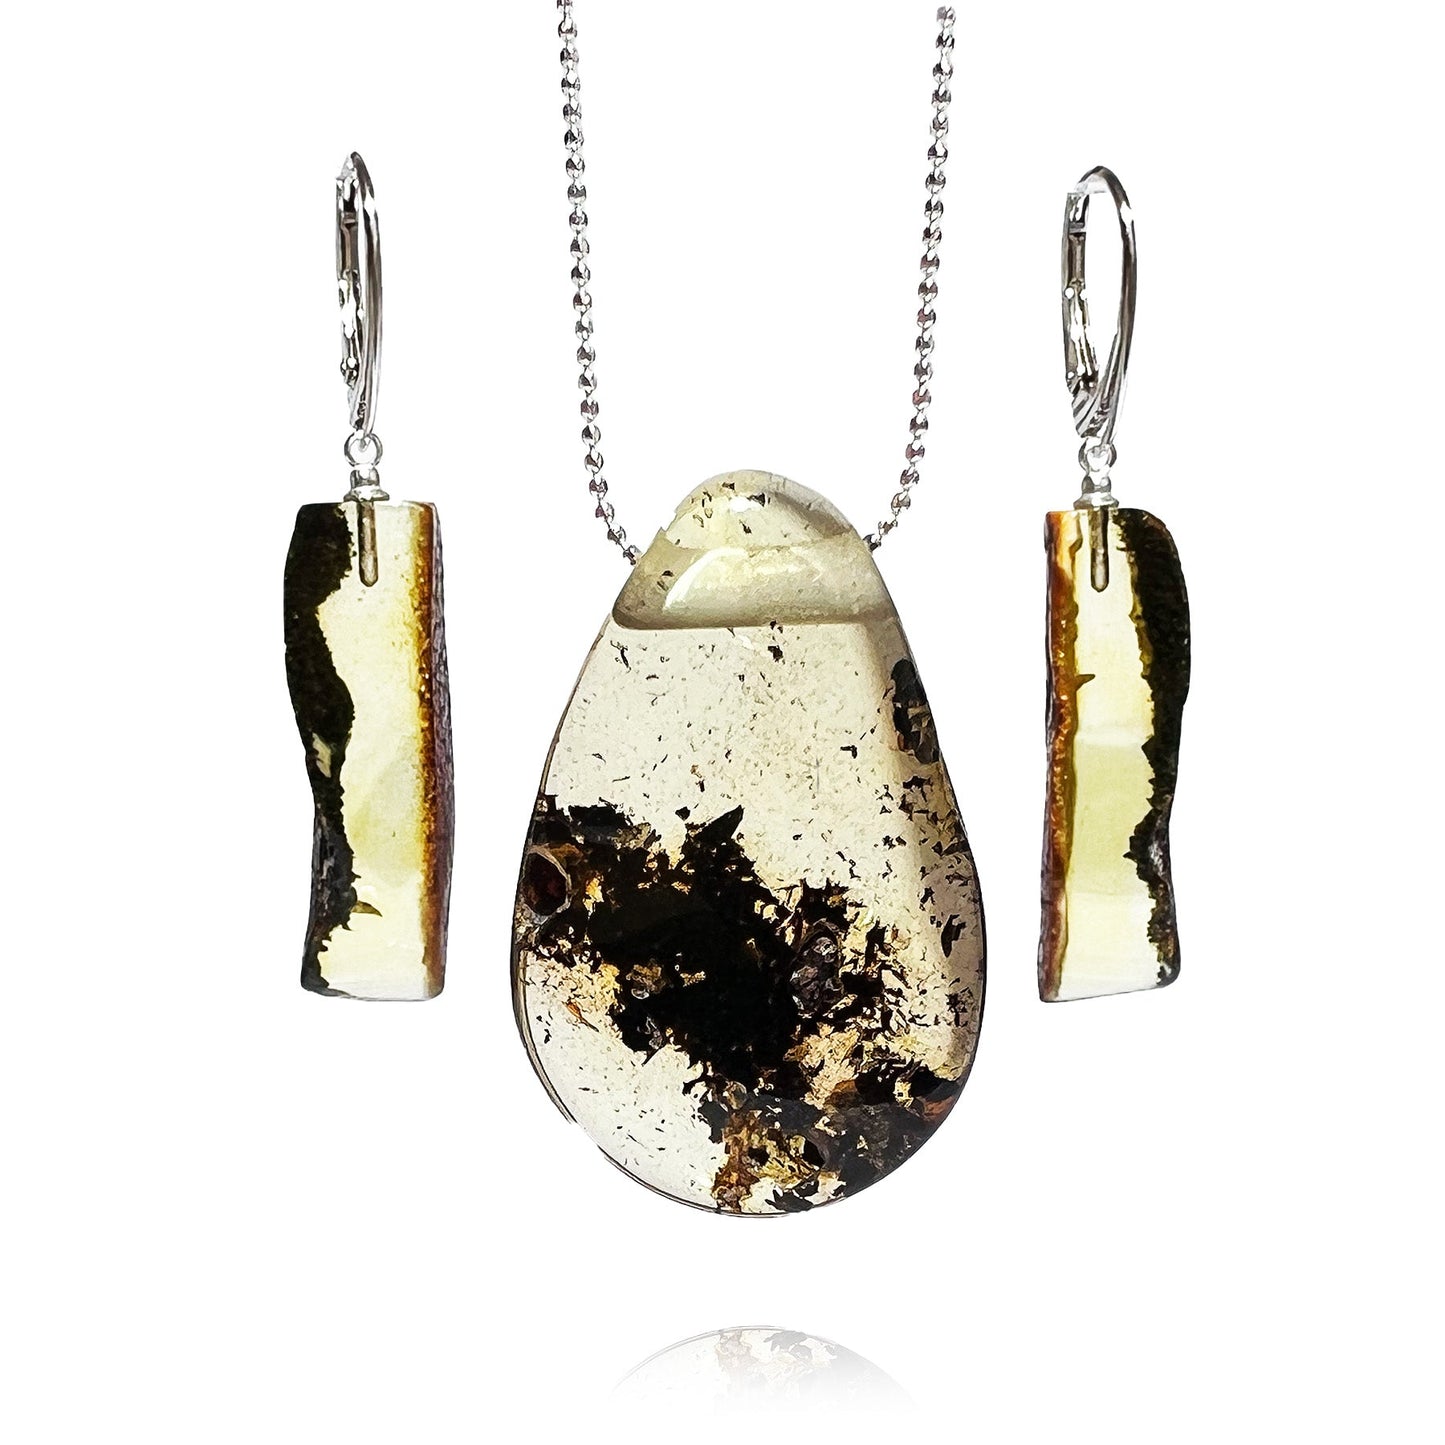 Amber set, silver 925 "Surrounded by wisdom"